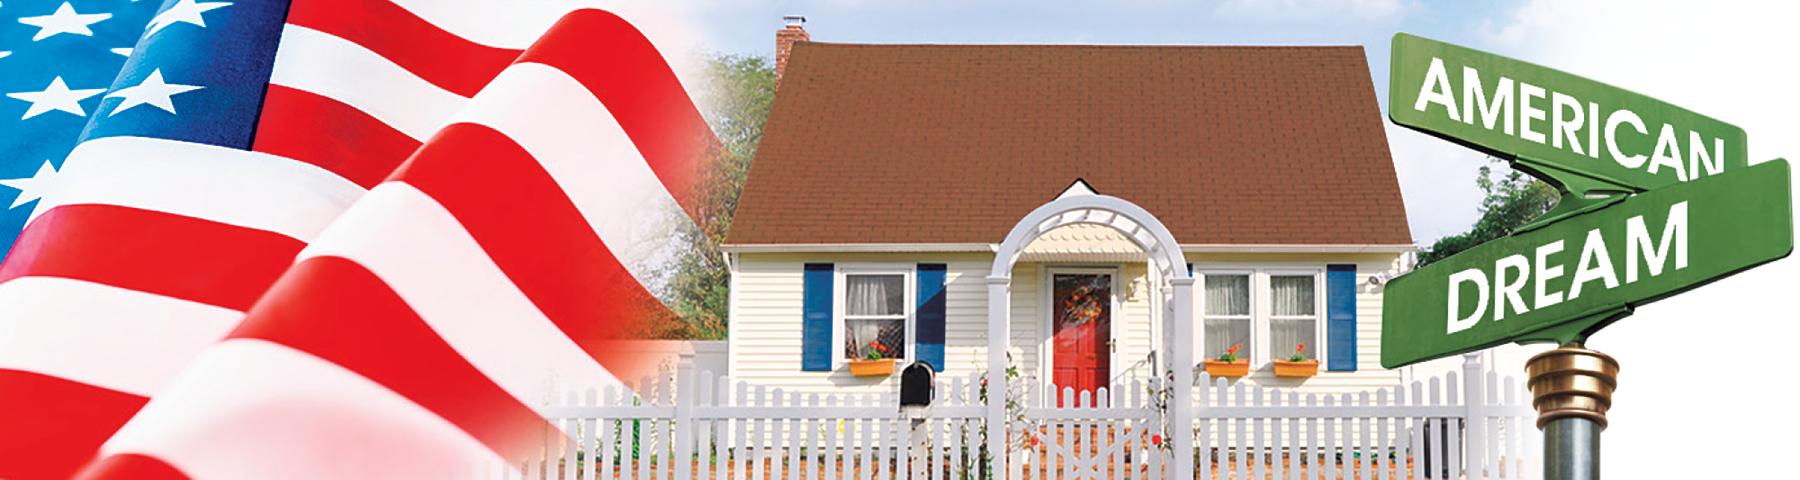 The American Dream - House with a White Picket Fence